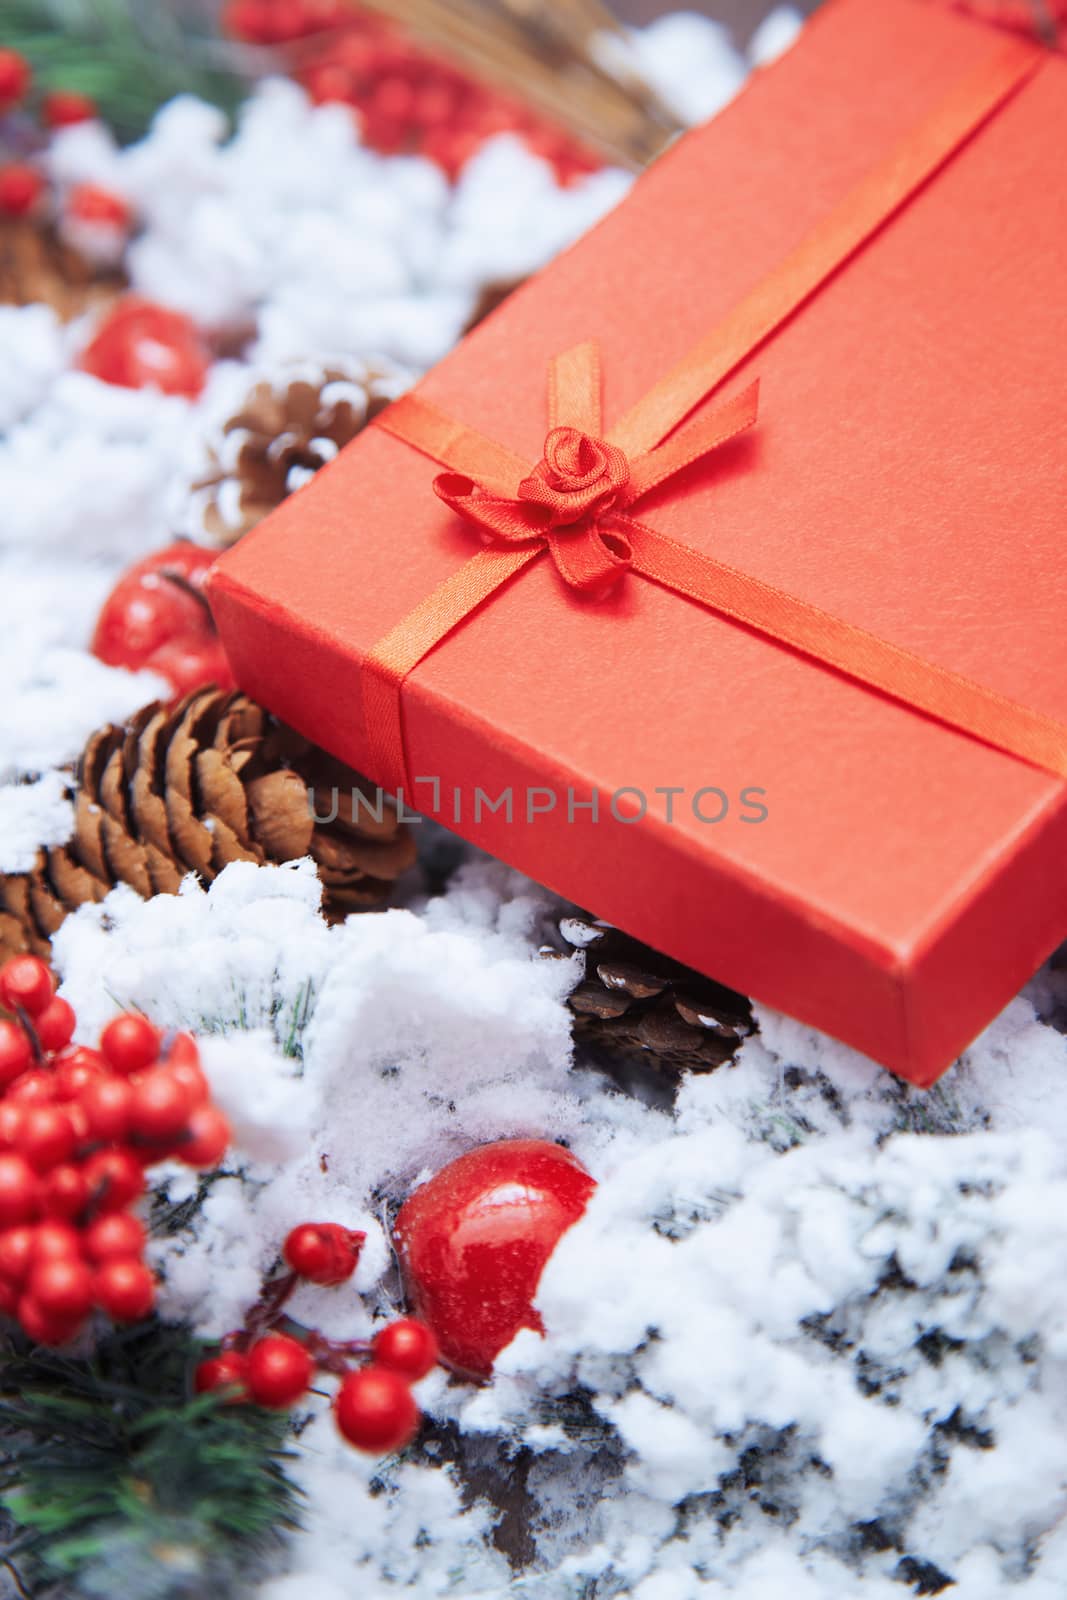 Christmas gift in a red box. Close-up vertical photo